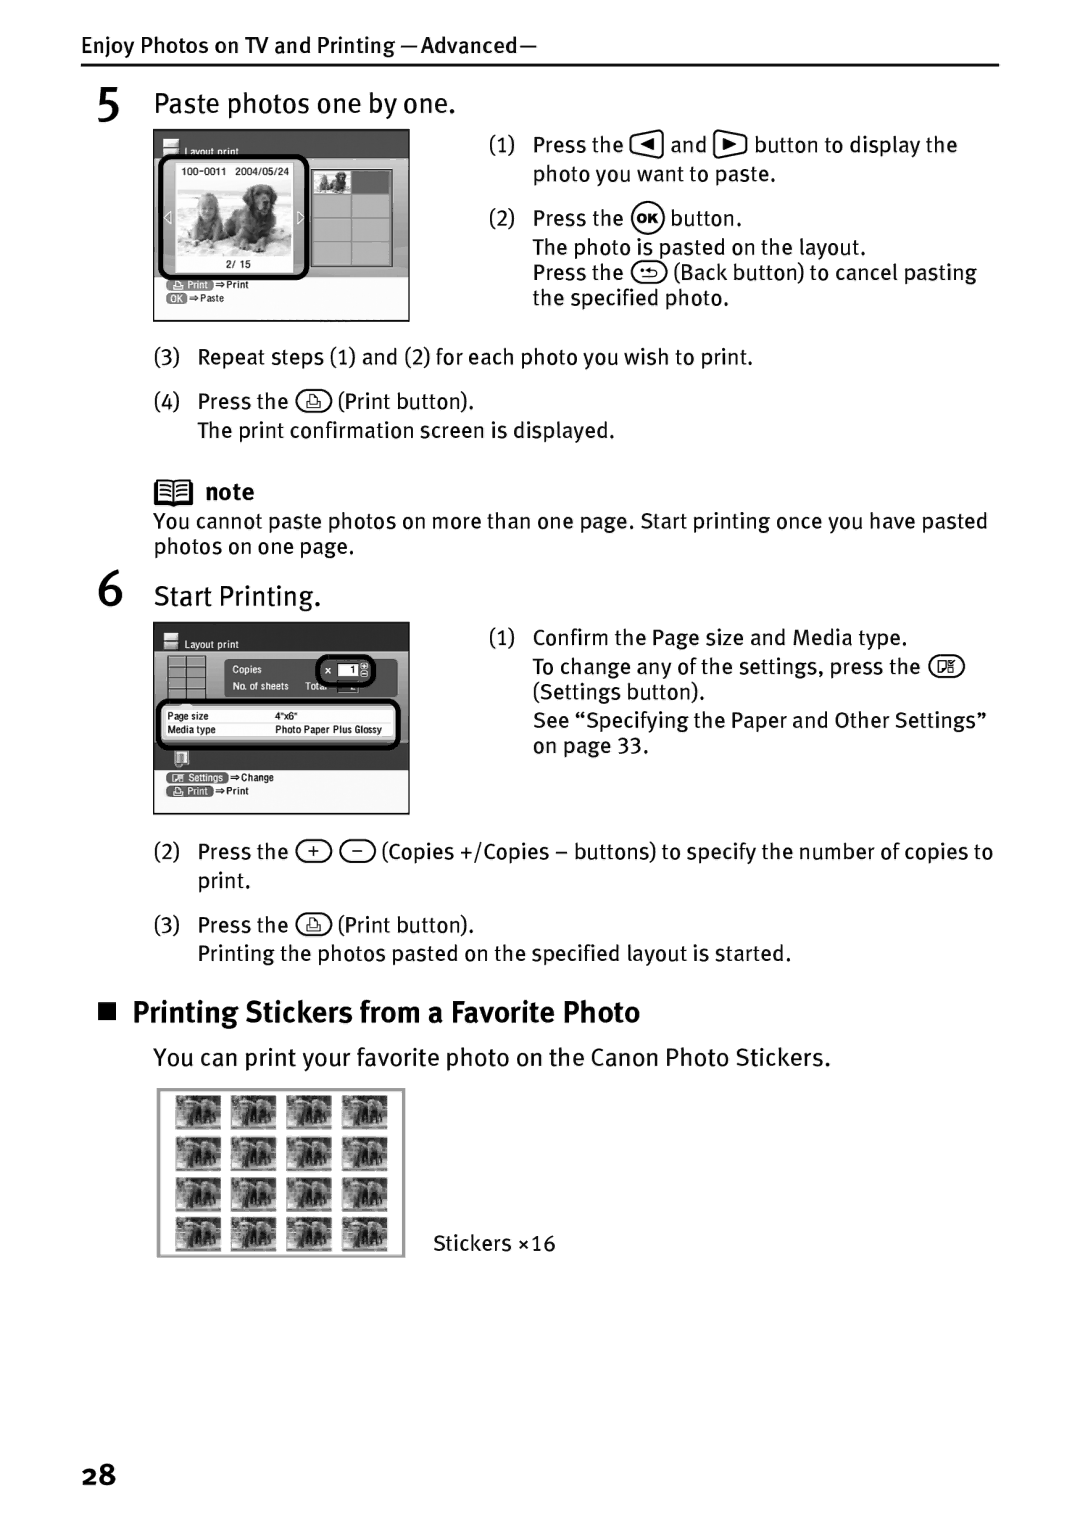 Canon DS700 manual „ Printing Stickers from a Favorite Photo, Paste photos one by one, Stickers ×16 